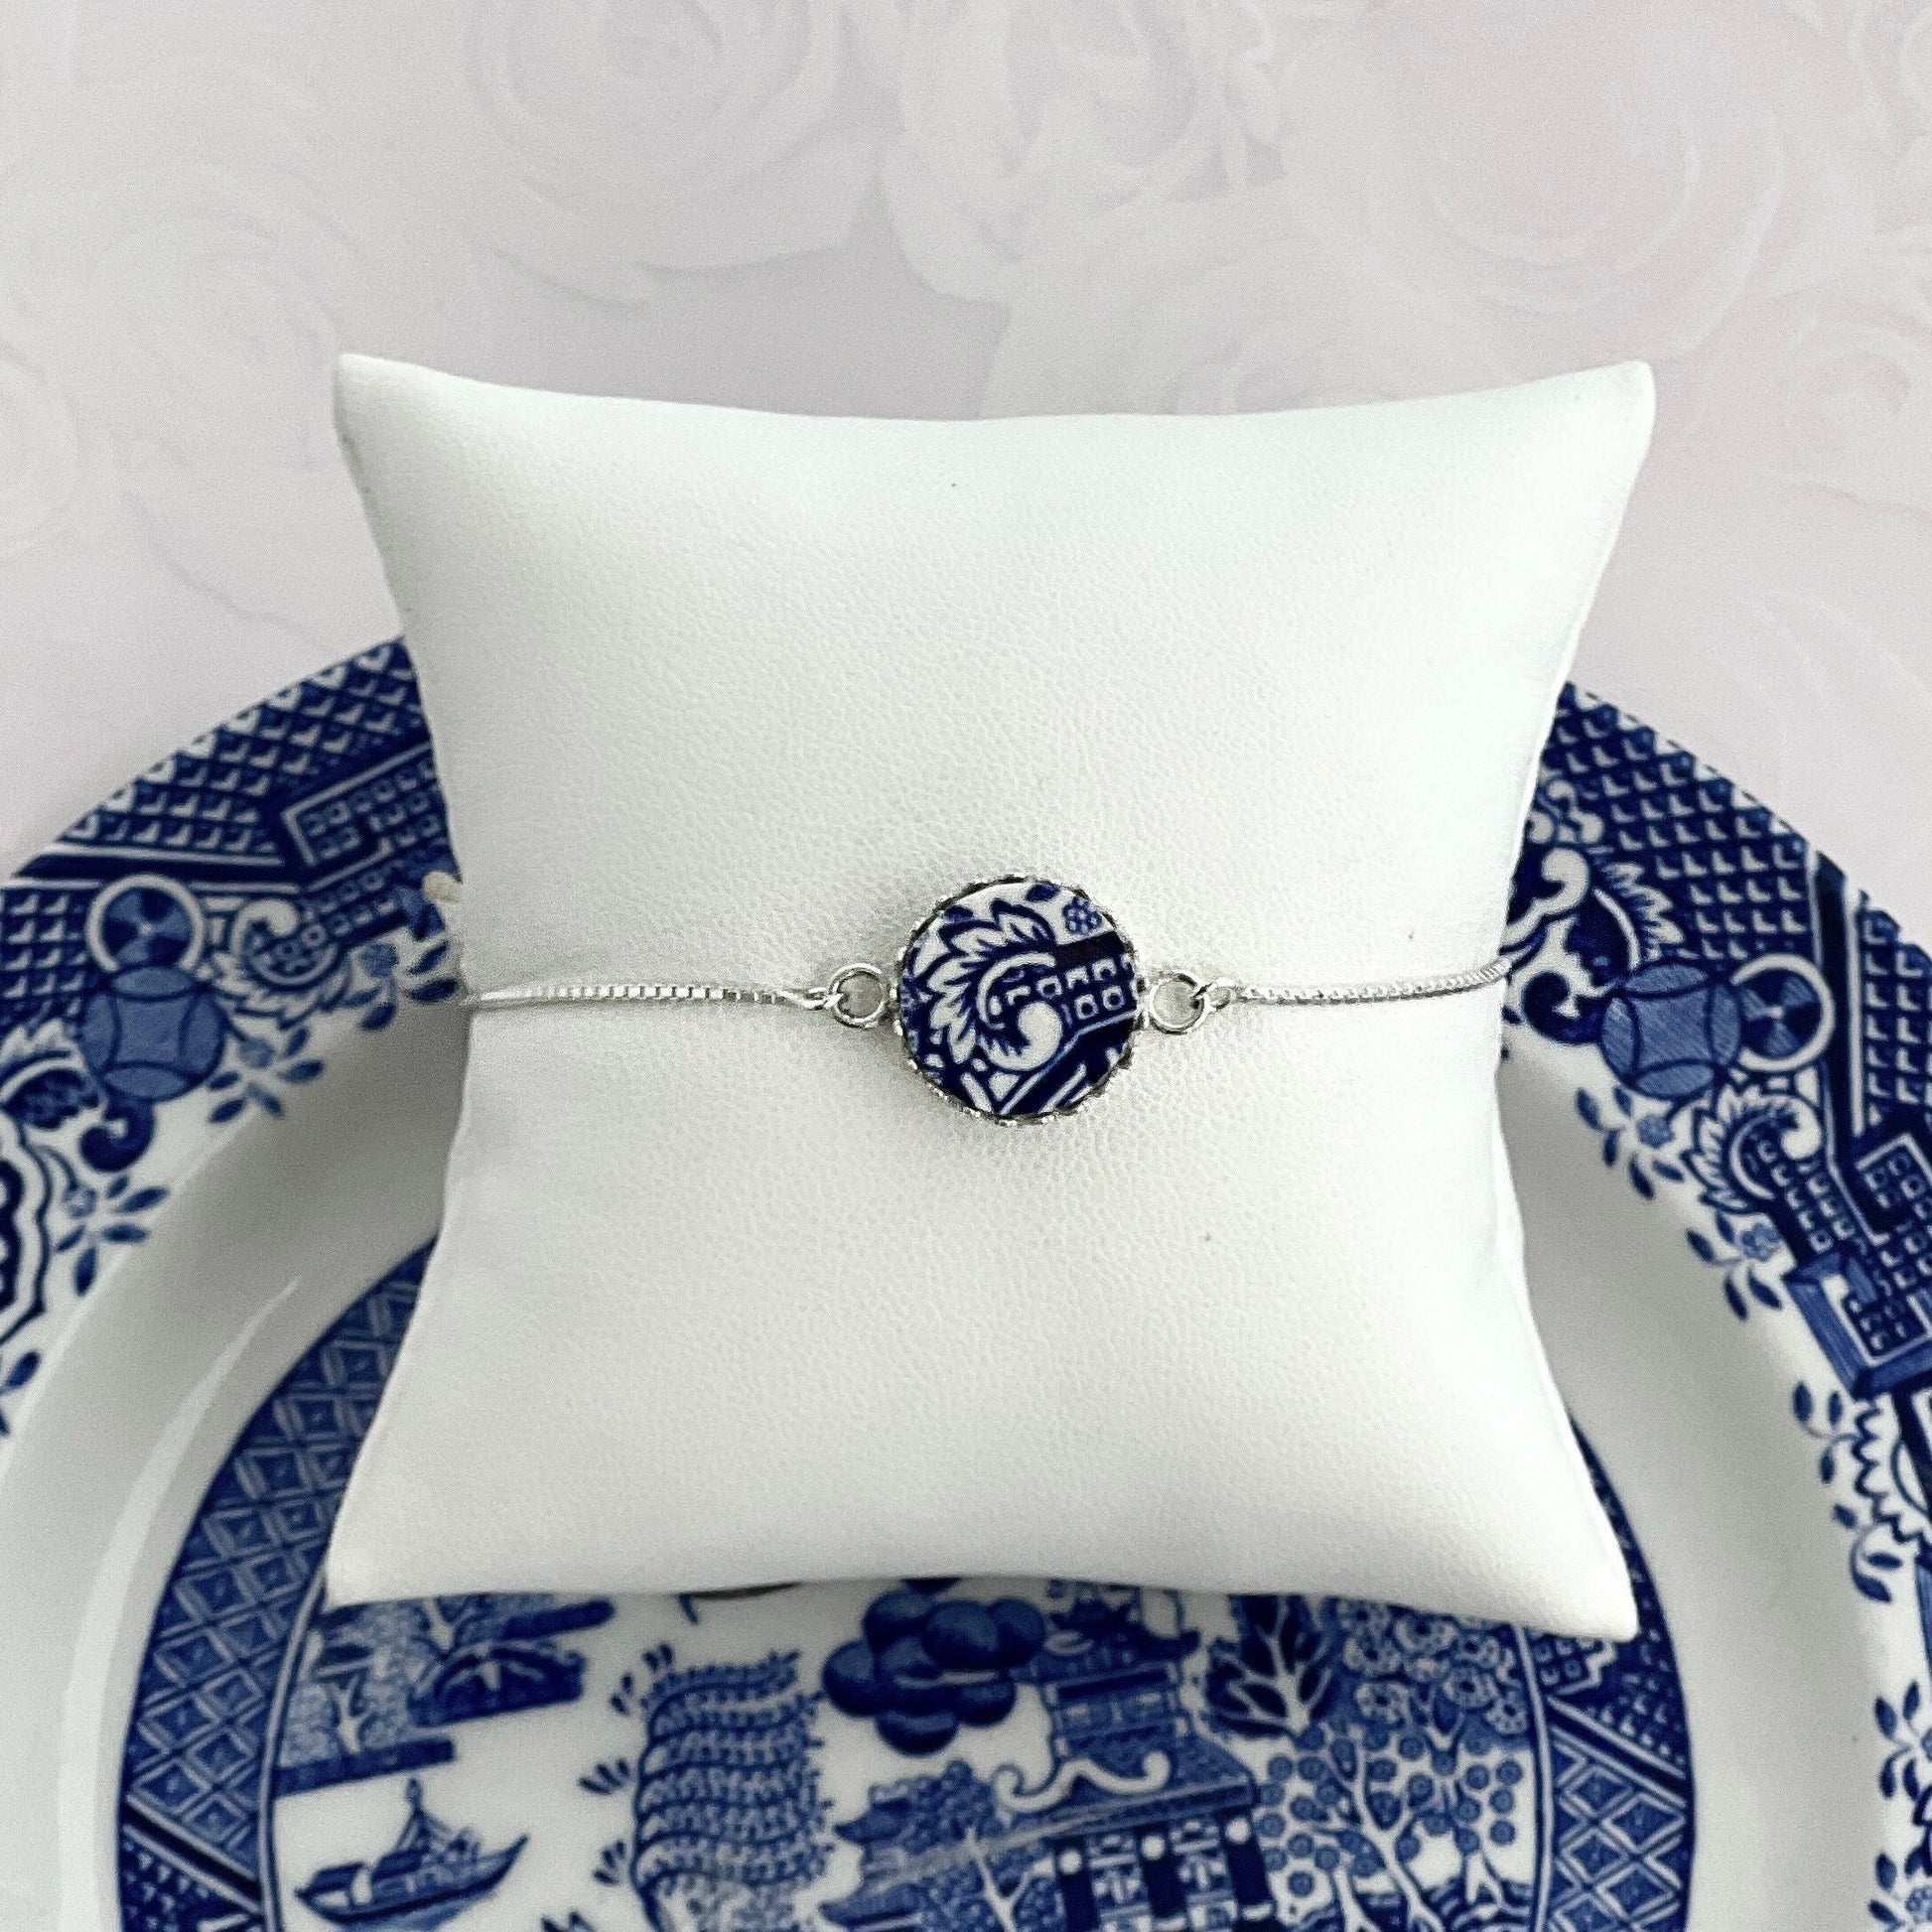 Blue Willow Bolo Bracelet, Broken China Jewelry, 9th Anniversary Gifts, Wife, Sterling Silver